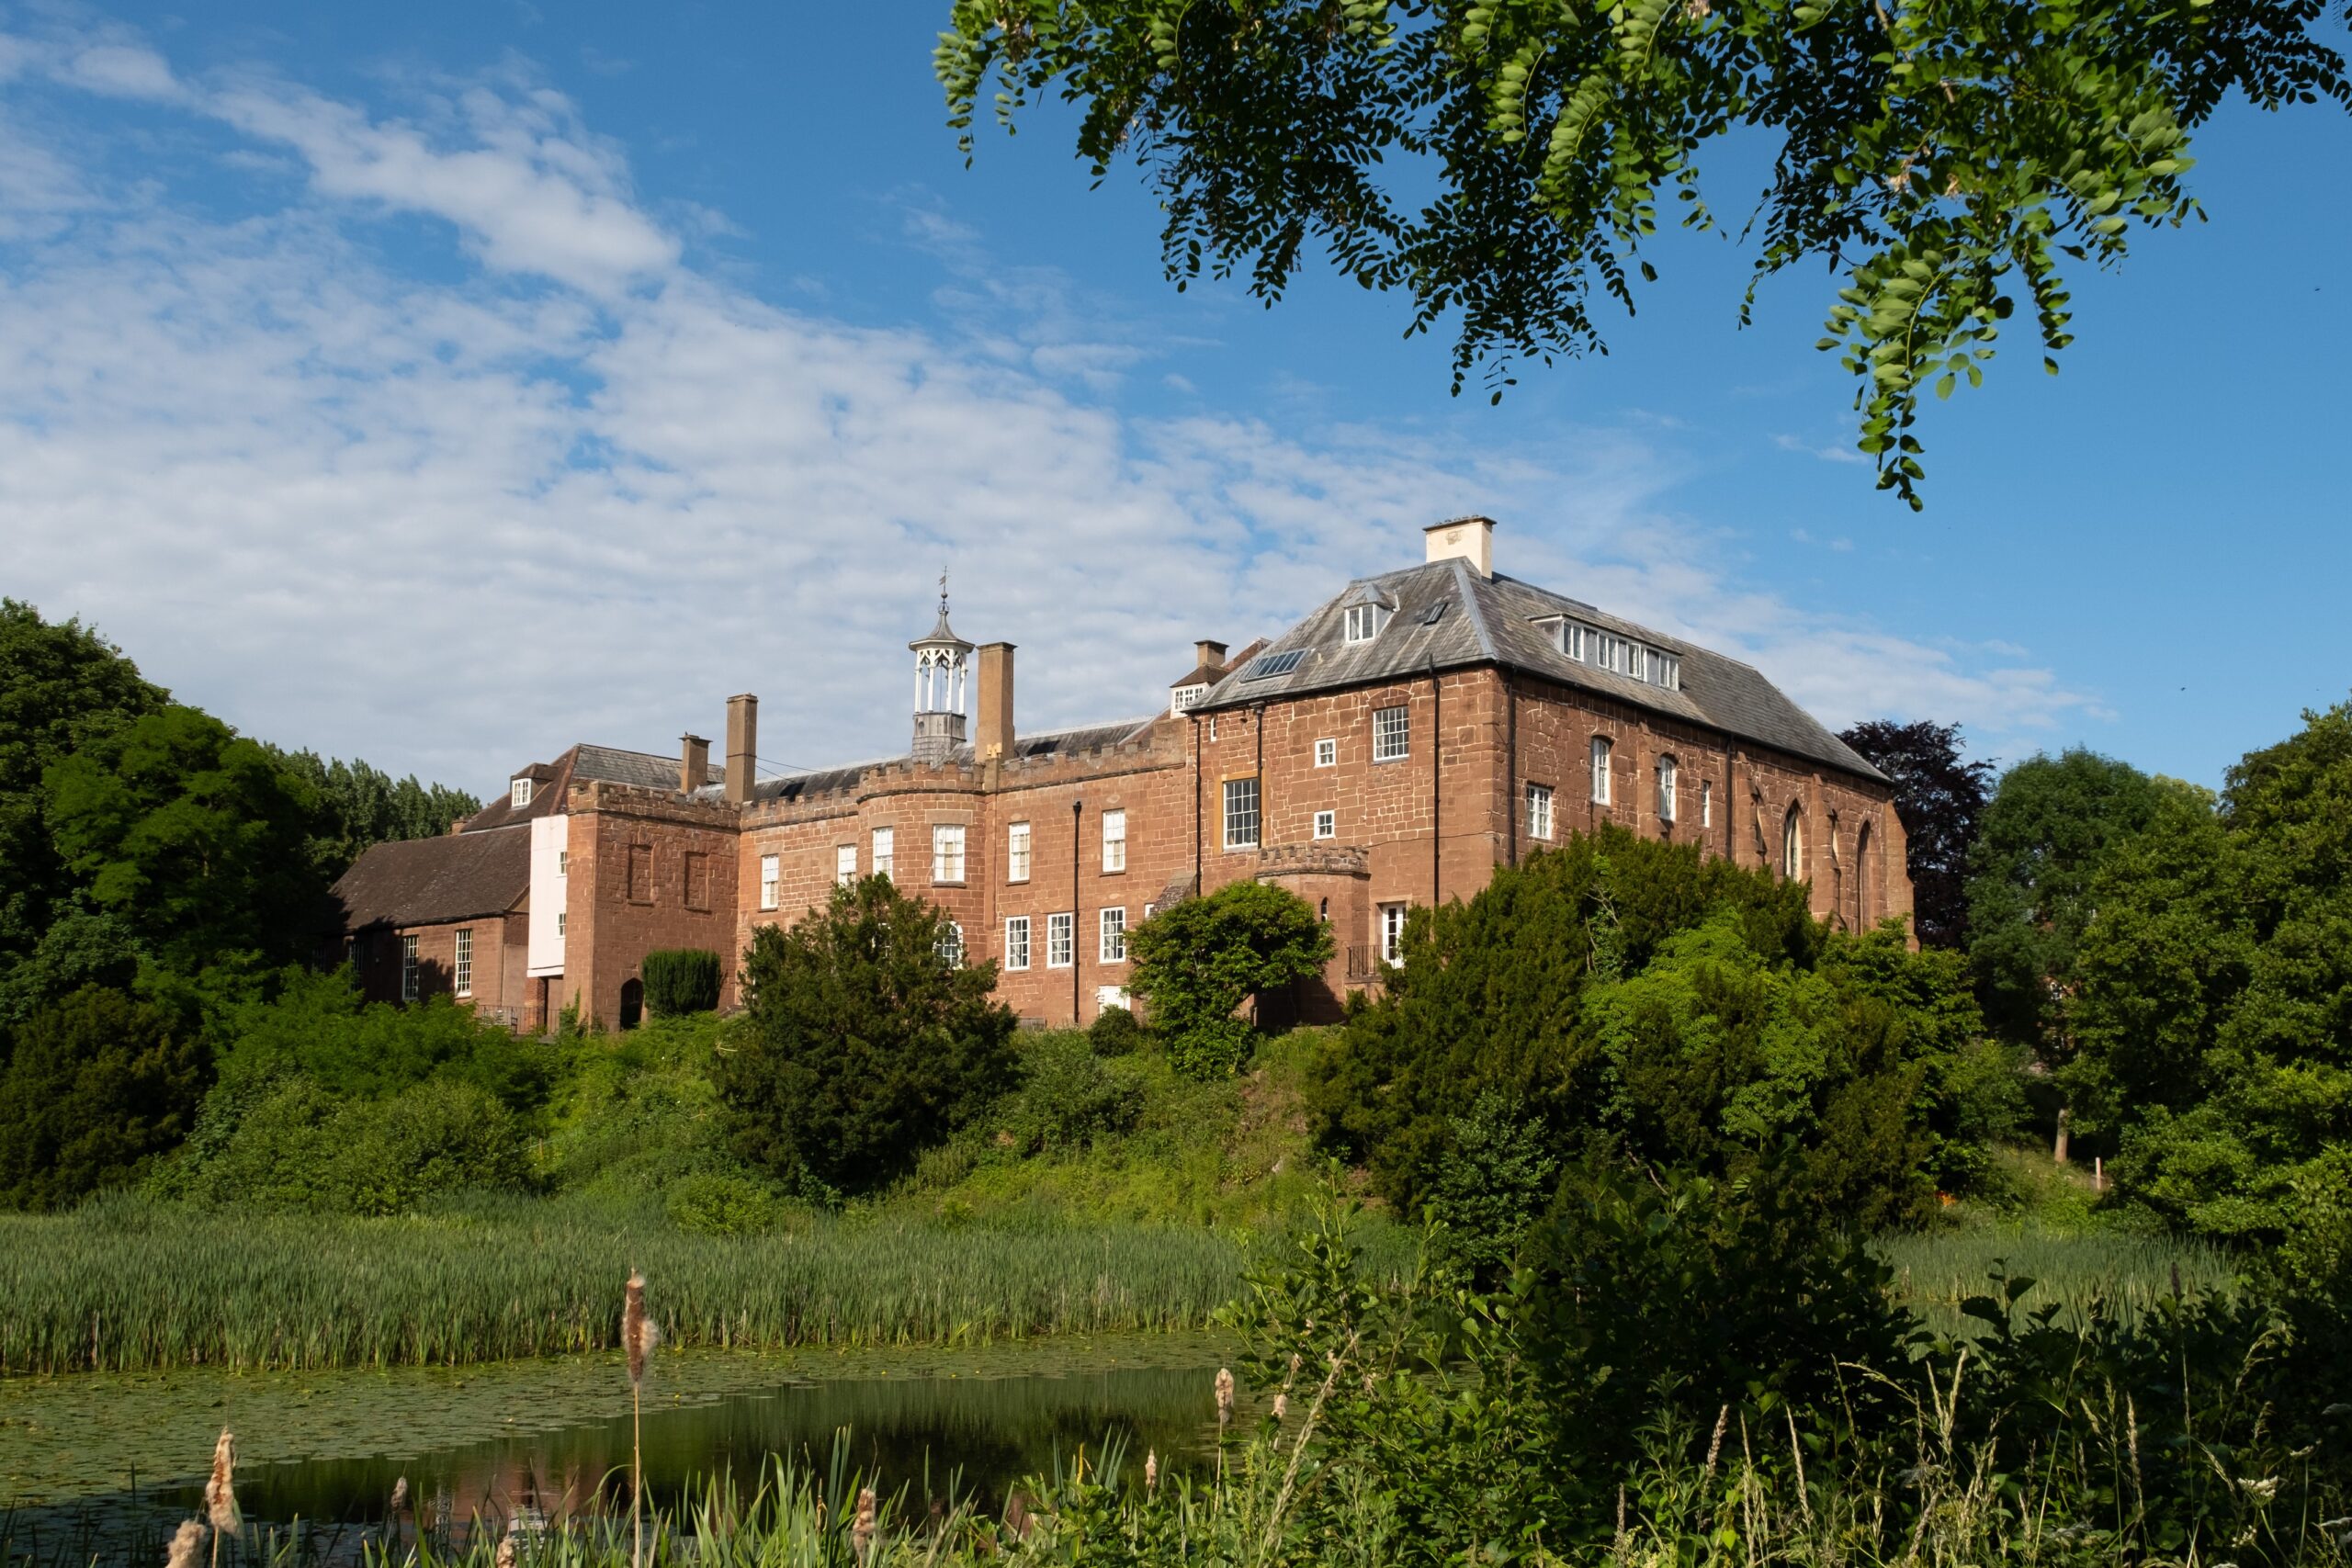 View of Hartlebury Castle across the moat